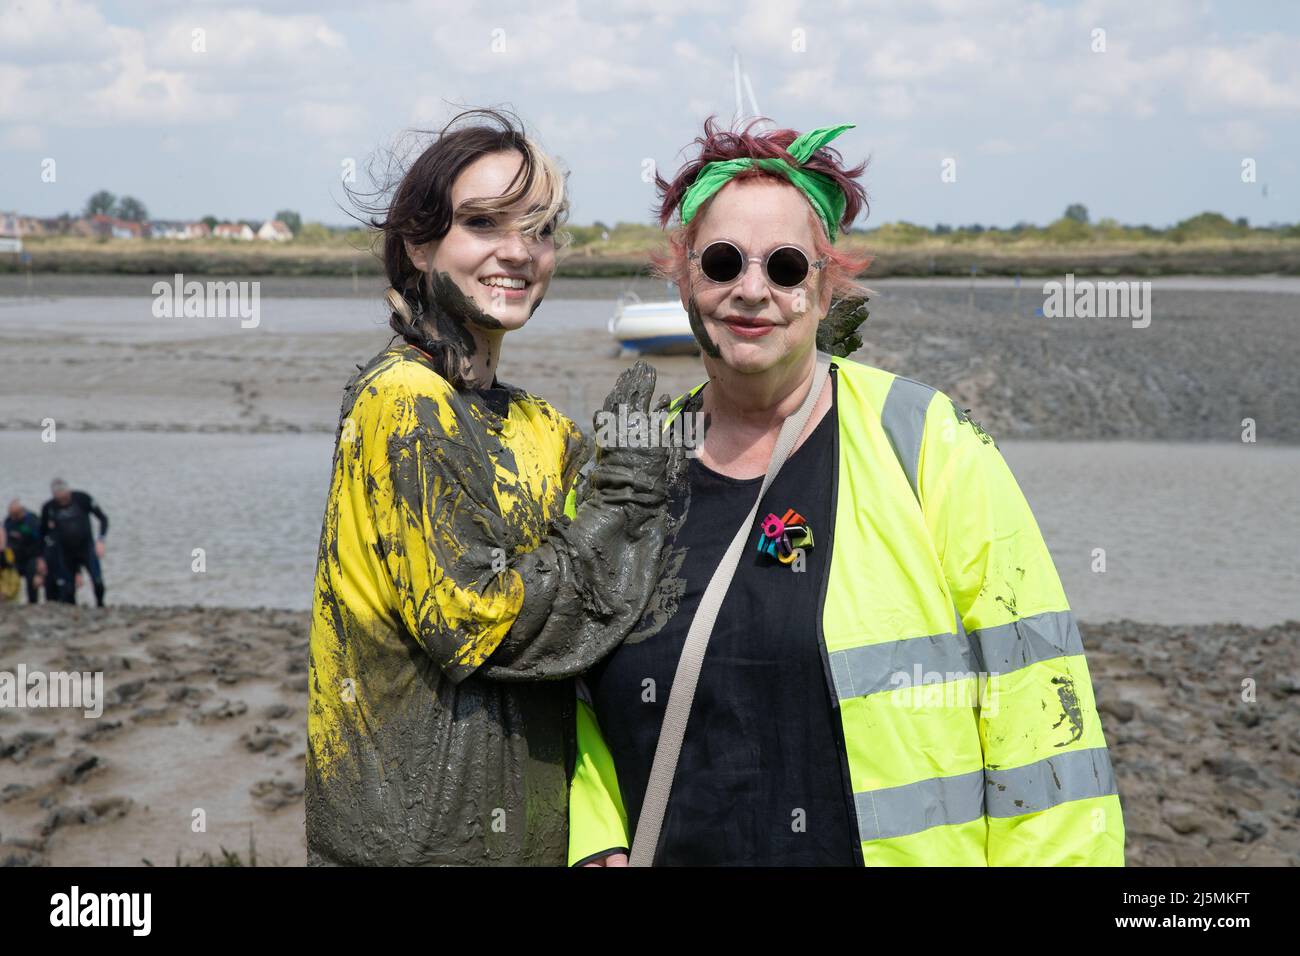 Jo Brand and her daughter Maisi take part in the Maldon Mud Race in Maldon, Essex as the race returns for the first time in two years. The Maldon Mud Race is an annual fun race held in spring (originally in the winter, now in late April or early May) at Promenade Park in Maldon, Essex, England, in which entrants compete to complete a 500 metres (550 yd) dash, in thick mud, over the bed of the River Blackwater. The race is organised by the Lions & Rotary clubs of Maldon and Maldon District Council which raises money for charity. (Photo by Lucy North/SOPA Images/Sipa USA) Stock Photo